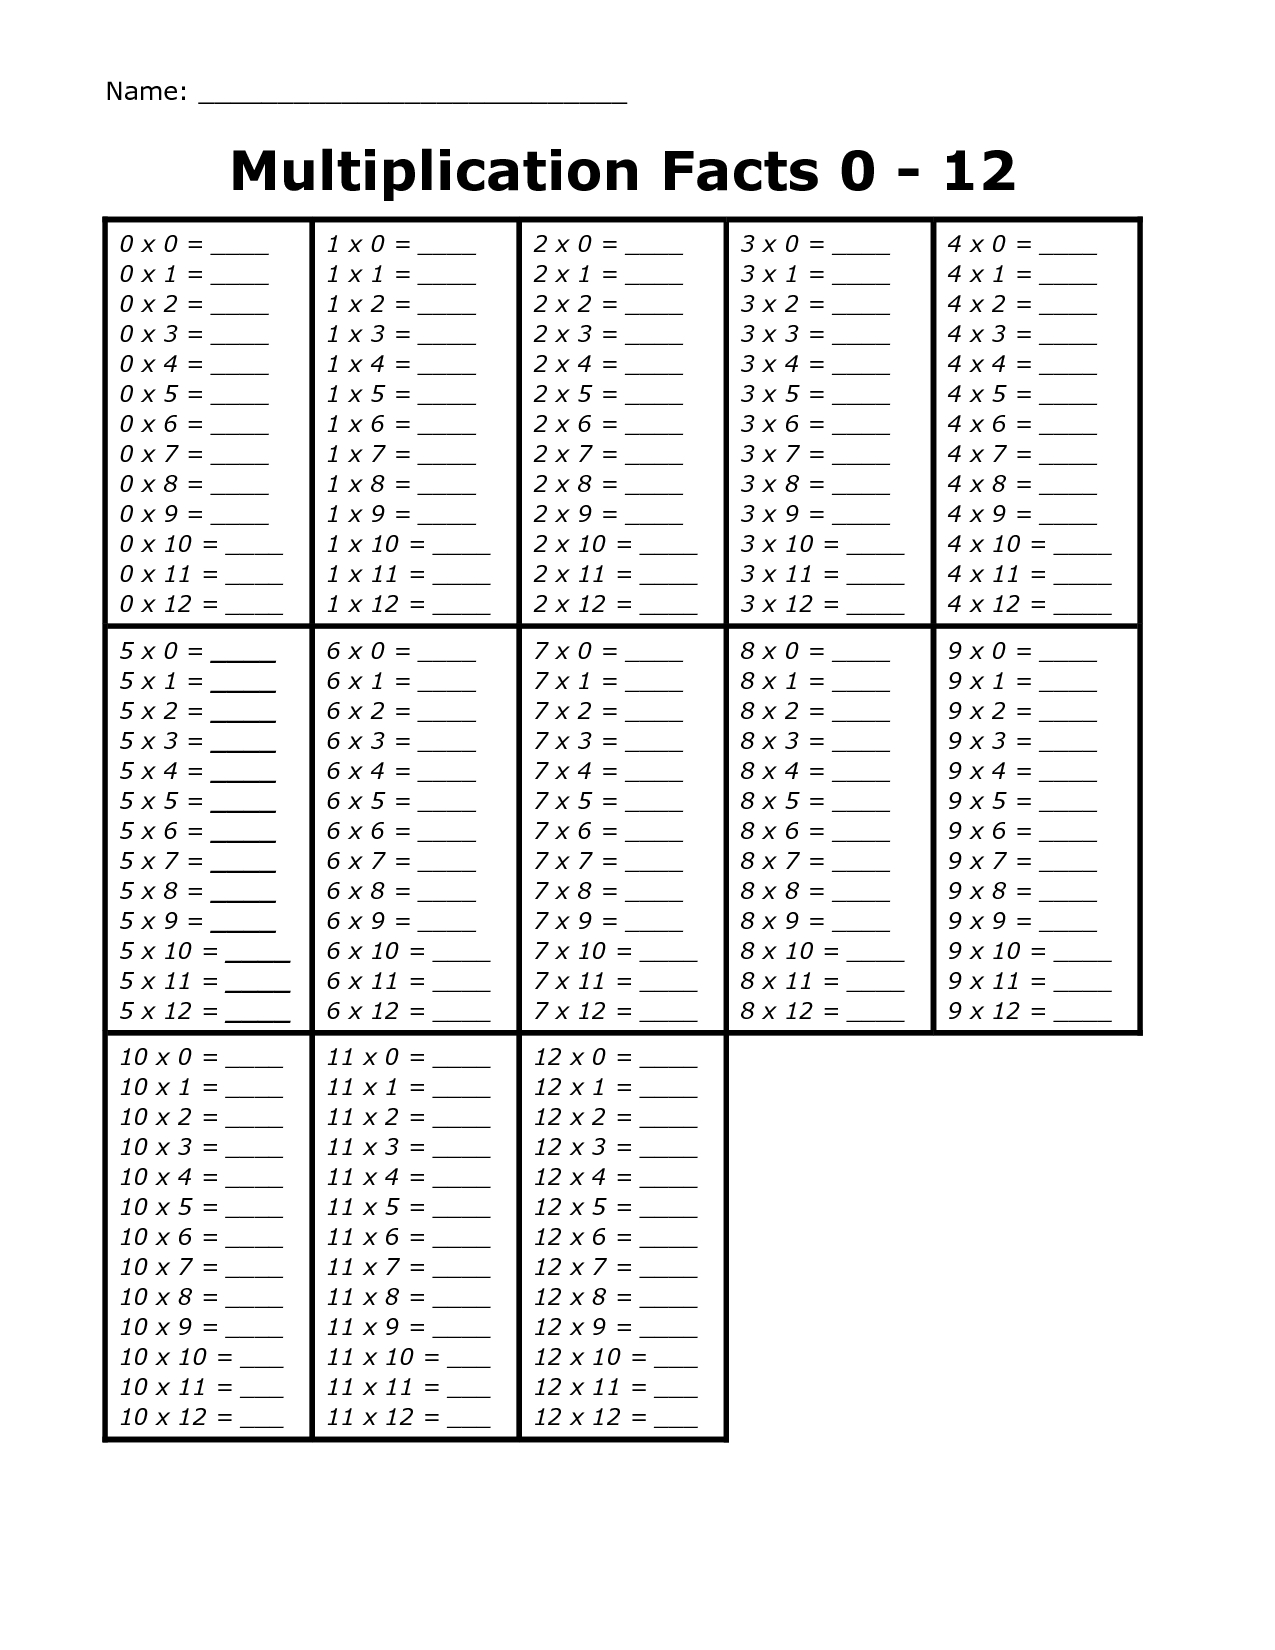 Printable Blank Multiplication Facts | Multiplication Facts pertaining to Printable Multiplication Flash Cards 7